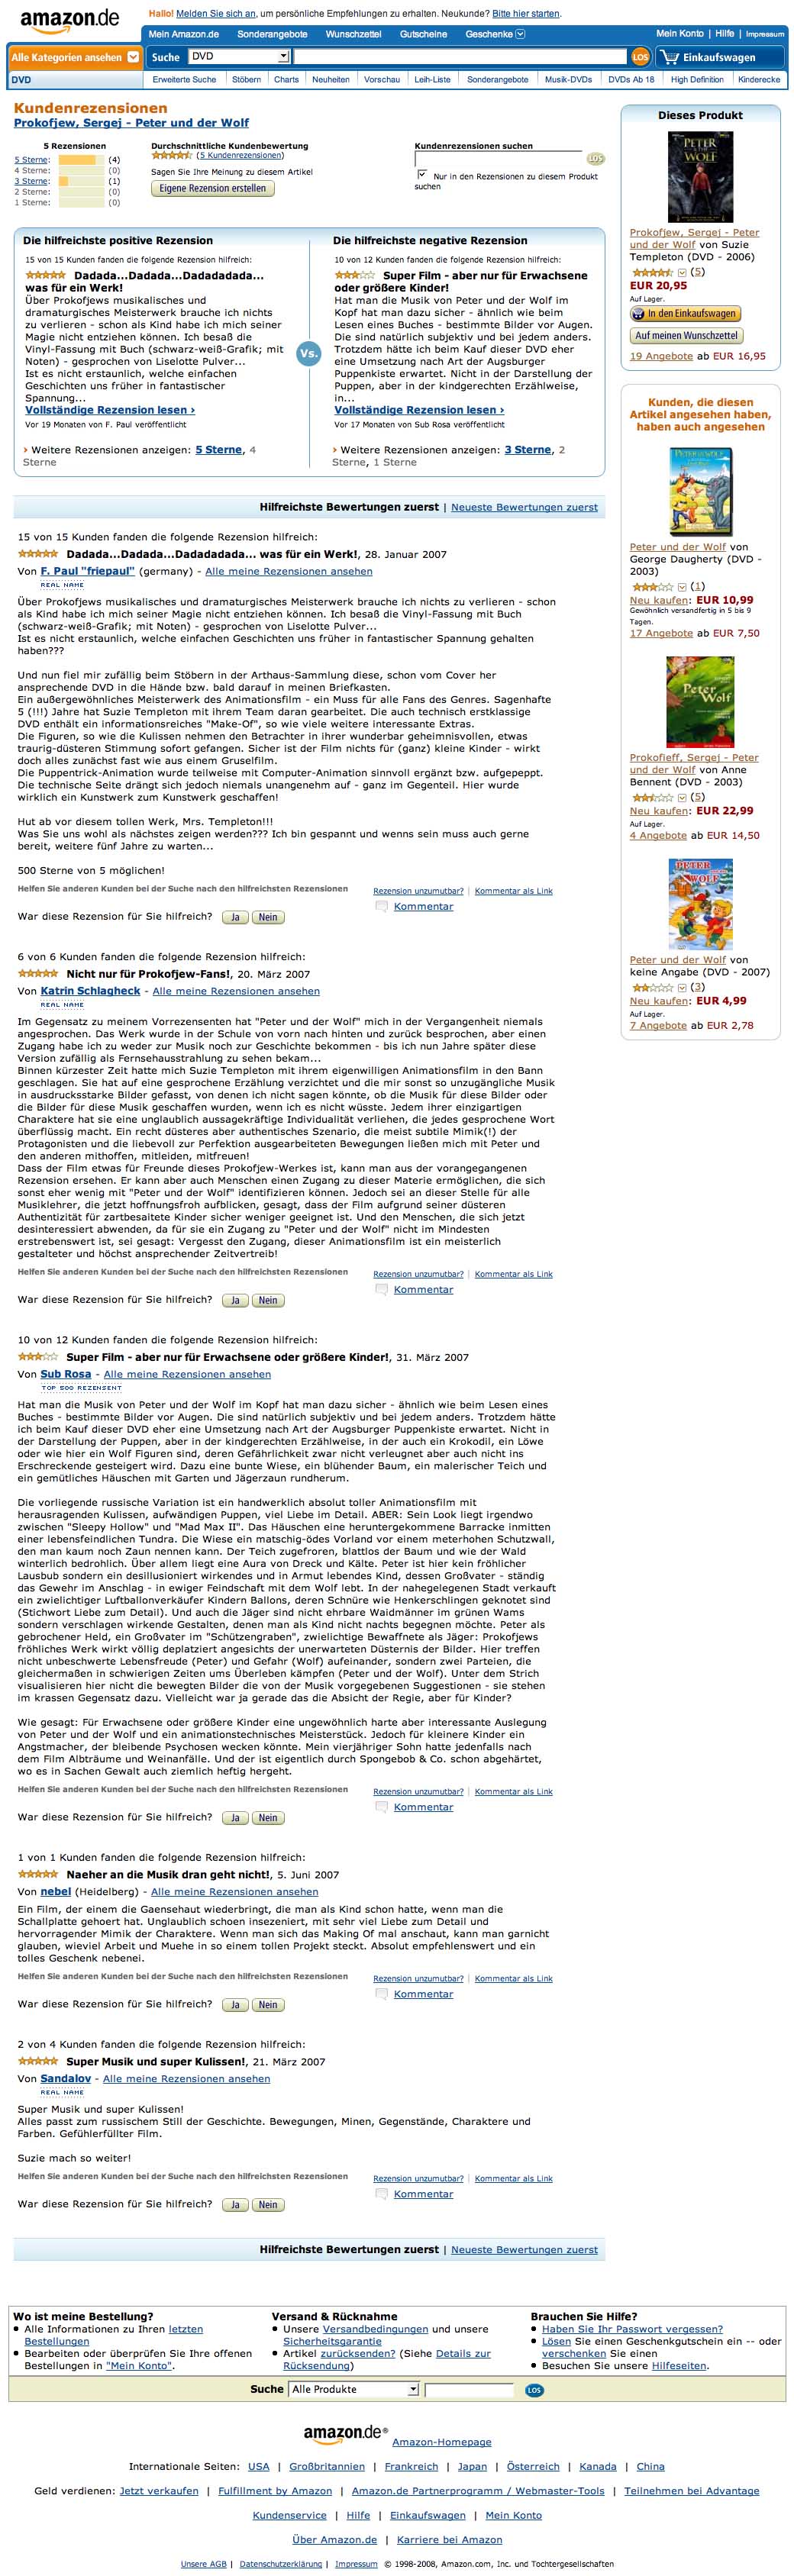 Amazon.de customer reviews of Peter and the Wolf